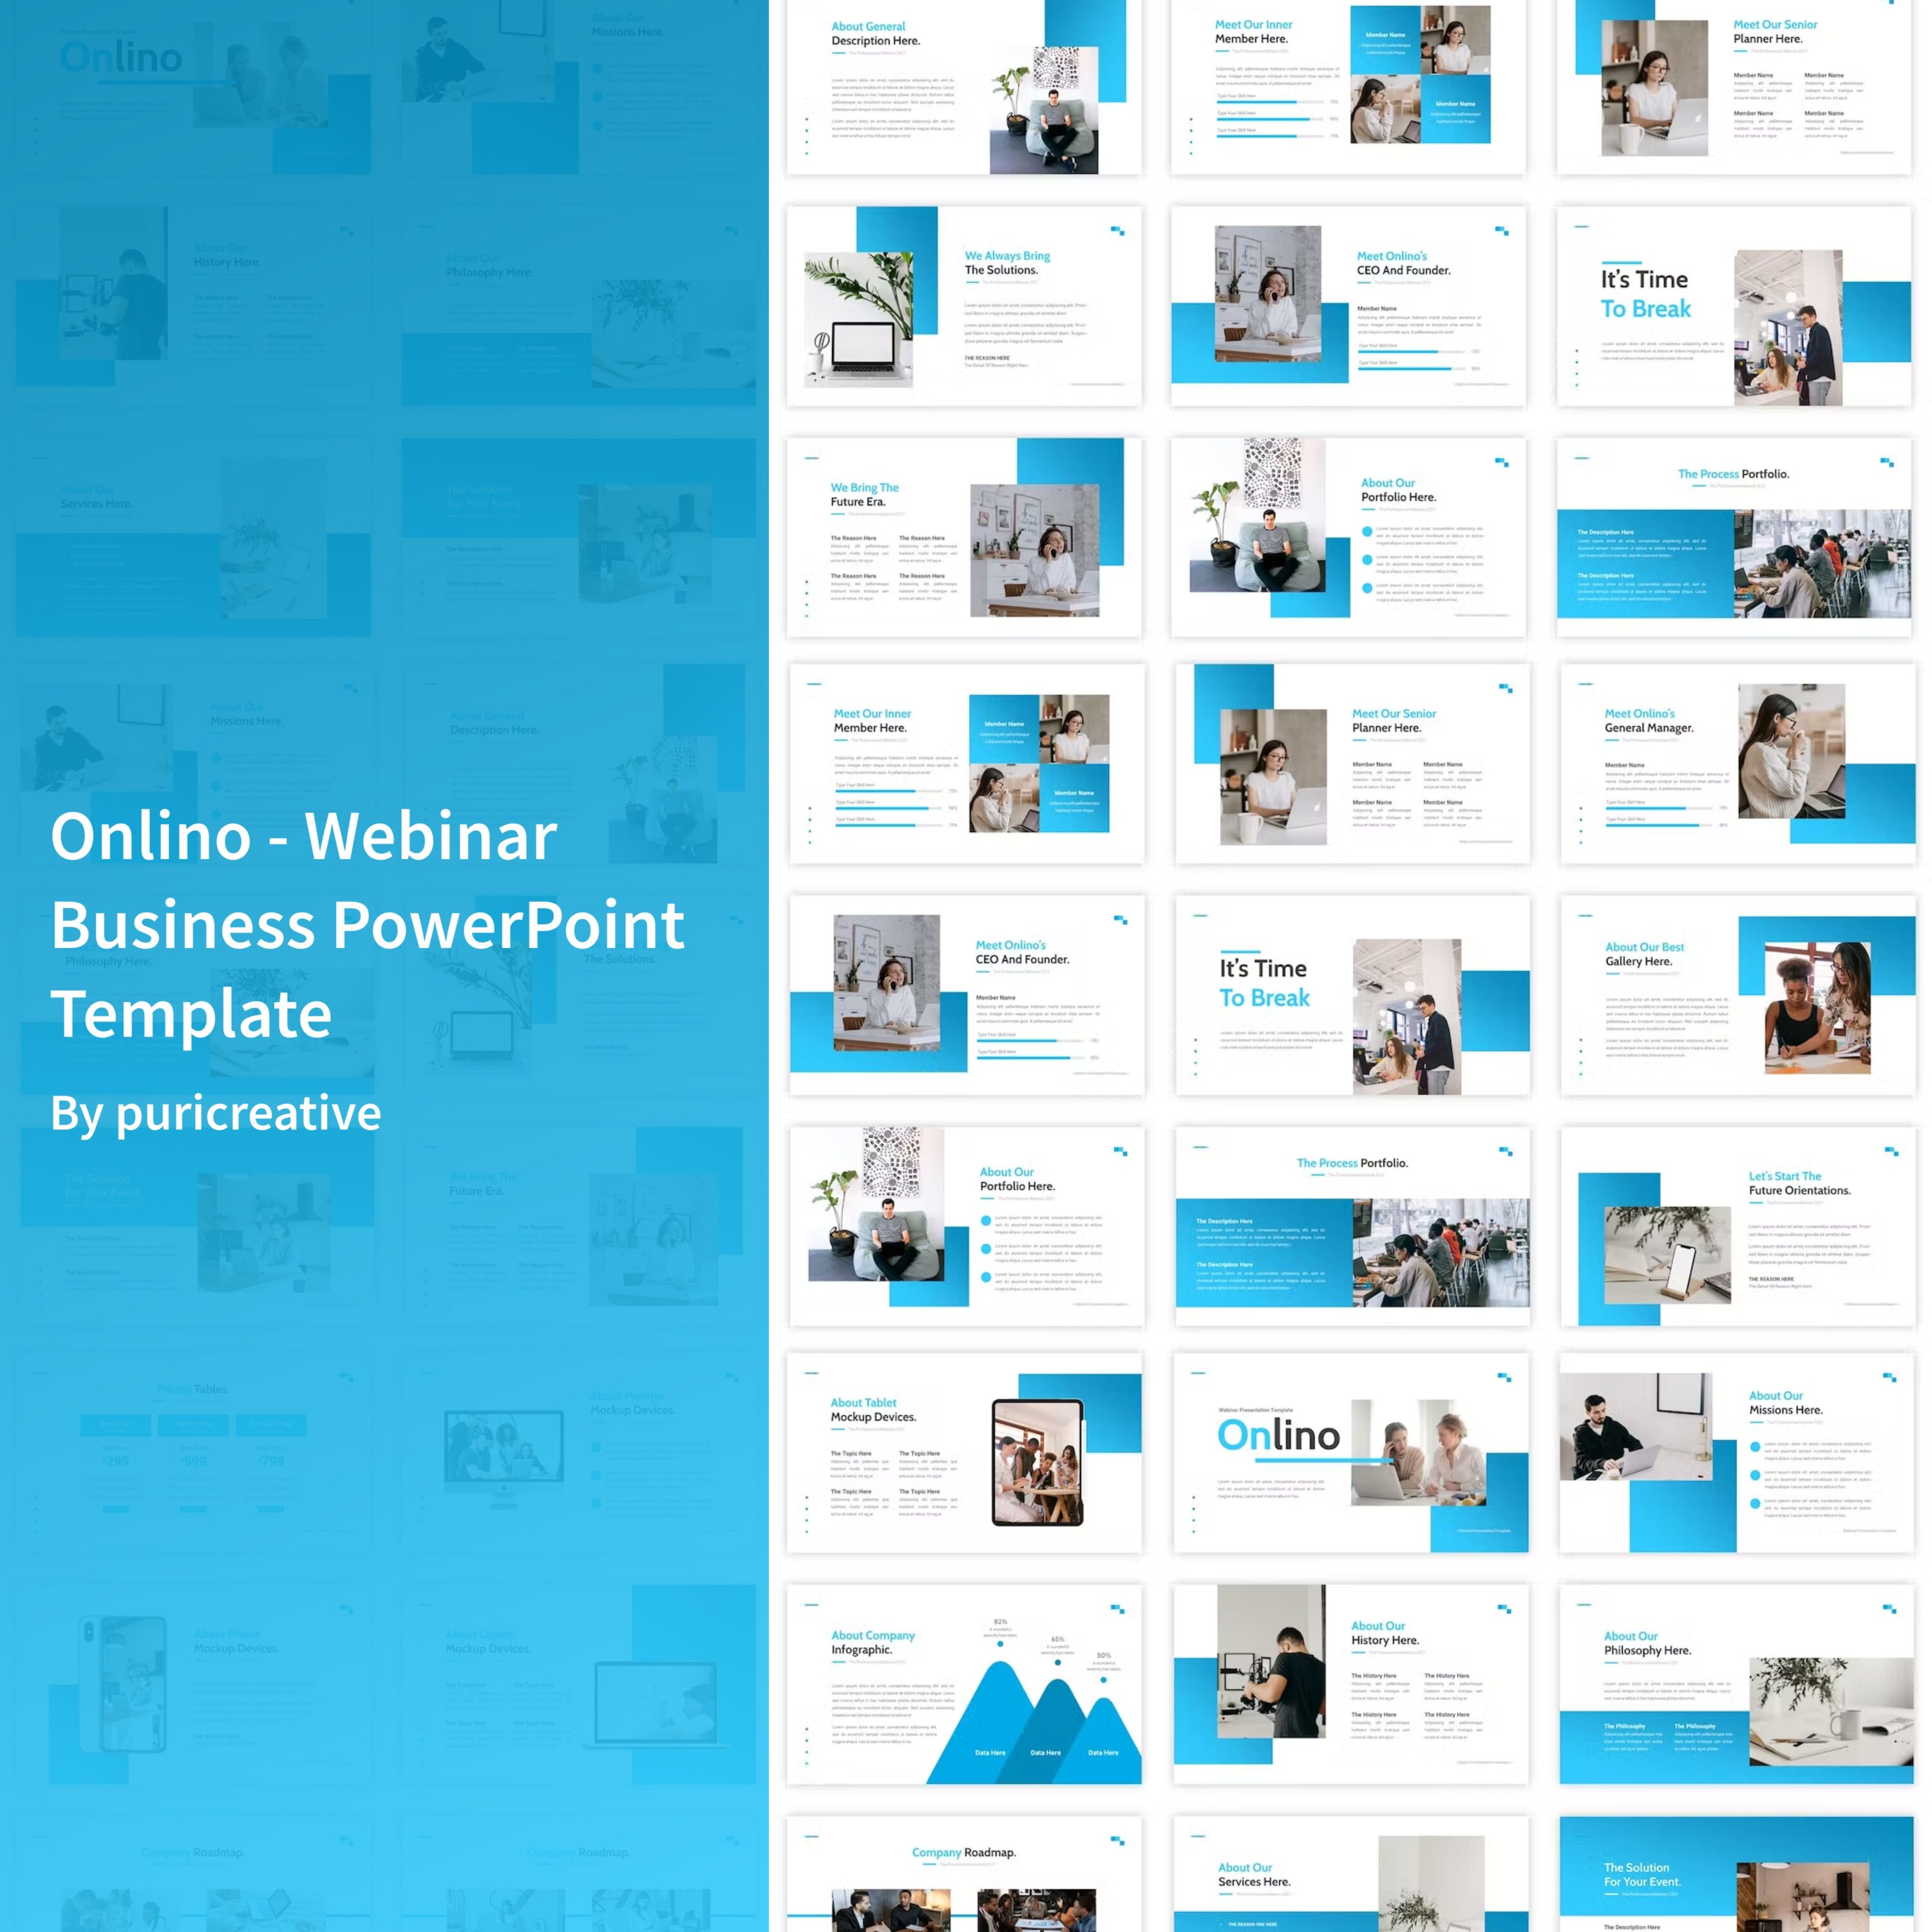 Onlino Webinar Business PowerPoint Template - main image preview.